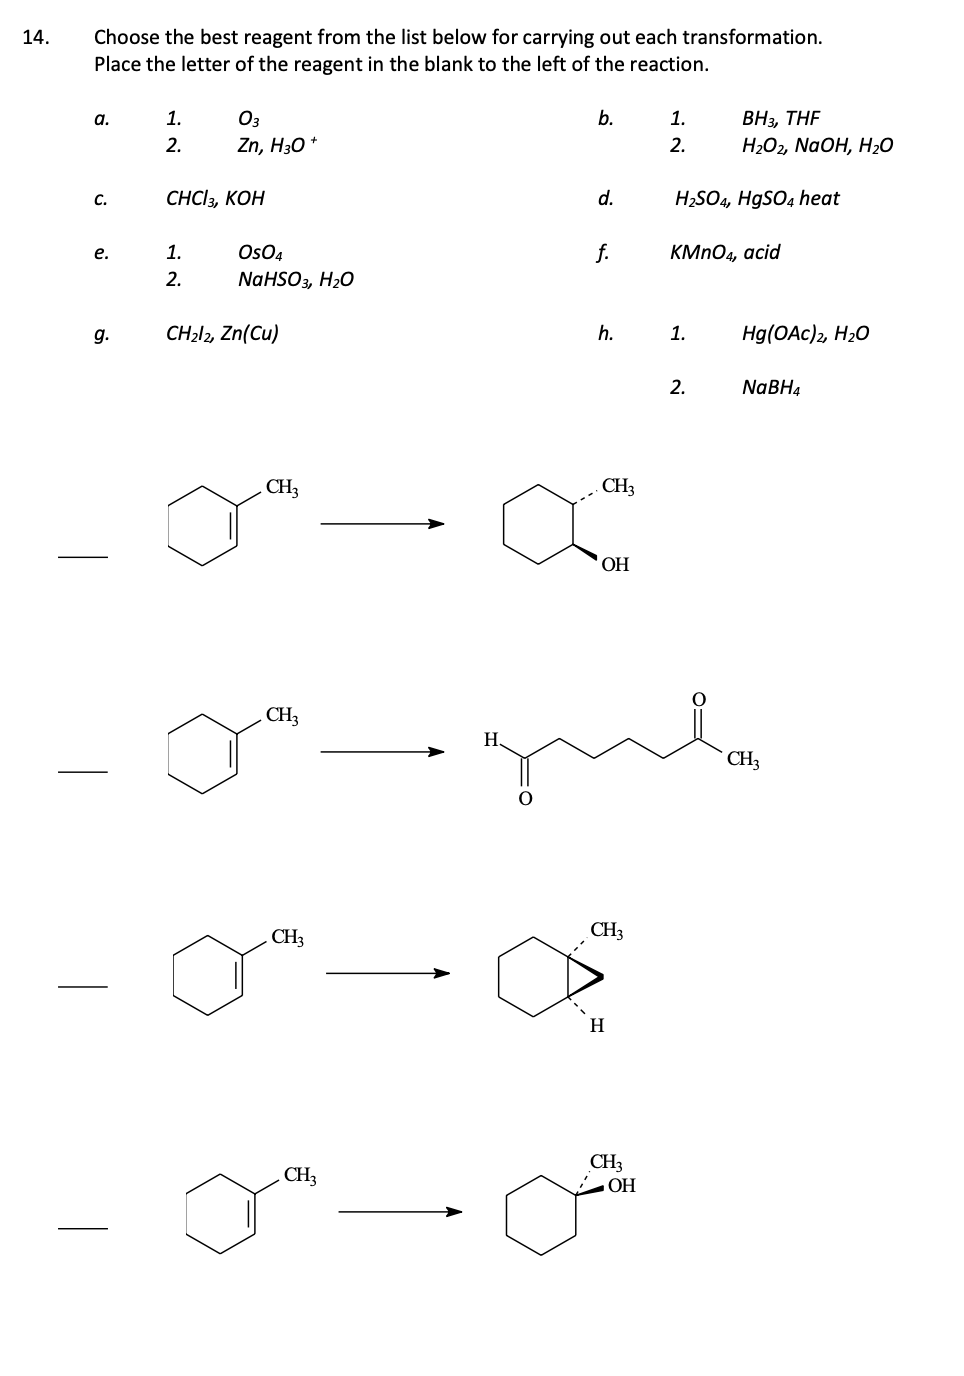 14.
Choose the best reagent from the list below for carrying out each transformation.
Place the letter of the reagent in the blank to the left of the reaction.
a.
C.
e.
g.
1.
2.
03
Zn, H3O+
CHCI3, KOH
1.
2.
OSO4
NaHSO3, H₂O
CH₂l2, Zn(Cu)
CH3
CH3
CH3
CH3
b.
H₂
d.
f.
h.
CH3
OH
CH3
H
CH3
1.
2.
OH
H₂SO4, HgSO4 heat
BH3, THF
H₂O2, NaOH, H₂O
KMnO4, acid
1.
gula
2.
Hg(OAC)2, H₂O
NaBH4